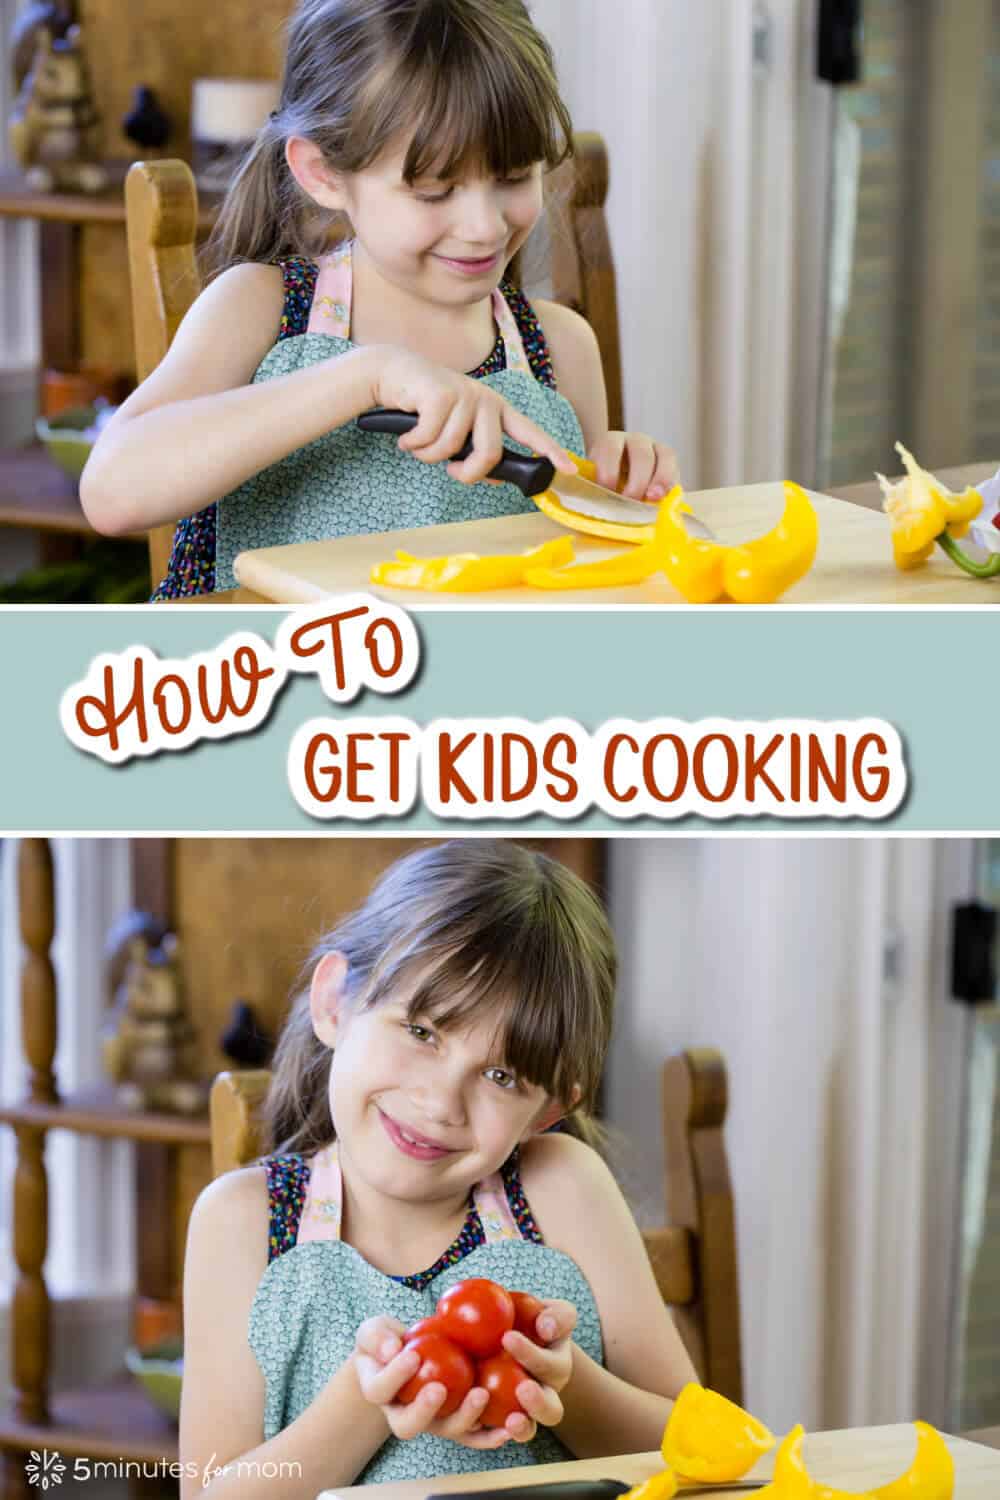 Young girl cooking - Text on image says How to Get Kids Cooking